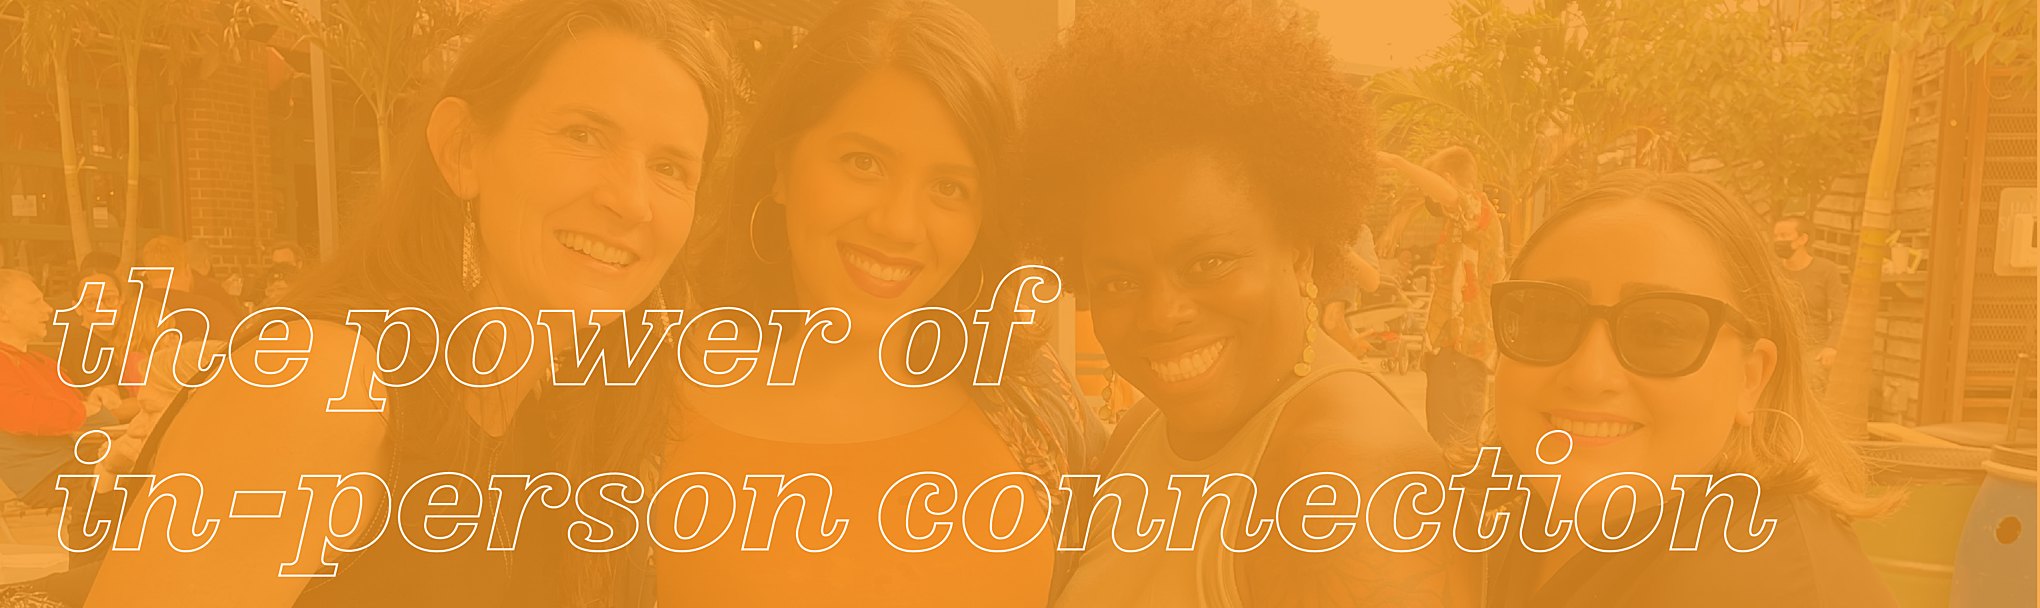 The power of in-person connection